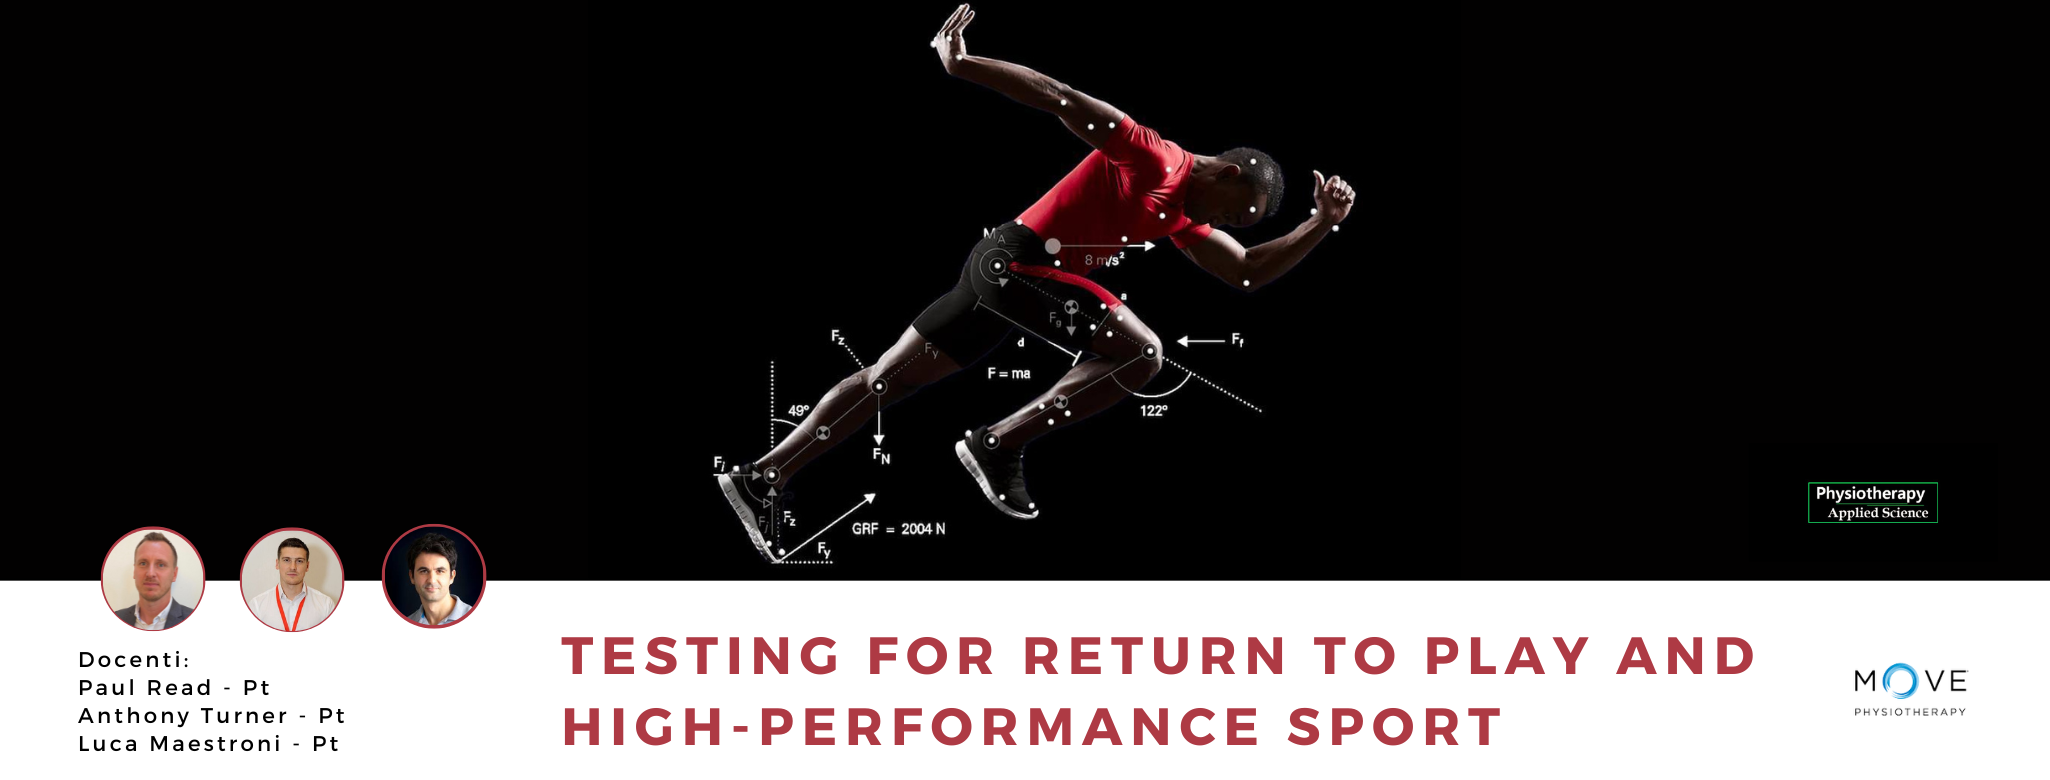 TESTING FOR RETURN TO PLAY AND HIGH-PERFORMANCE SPORT